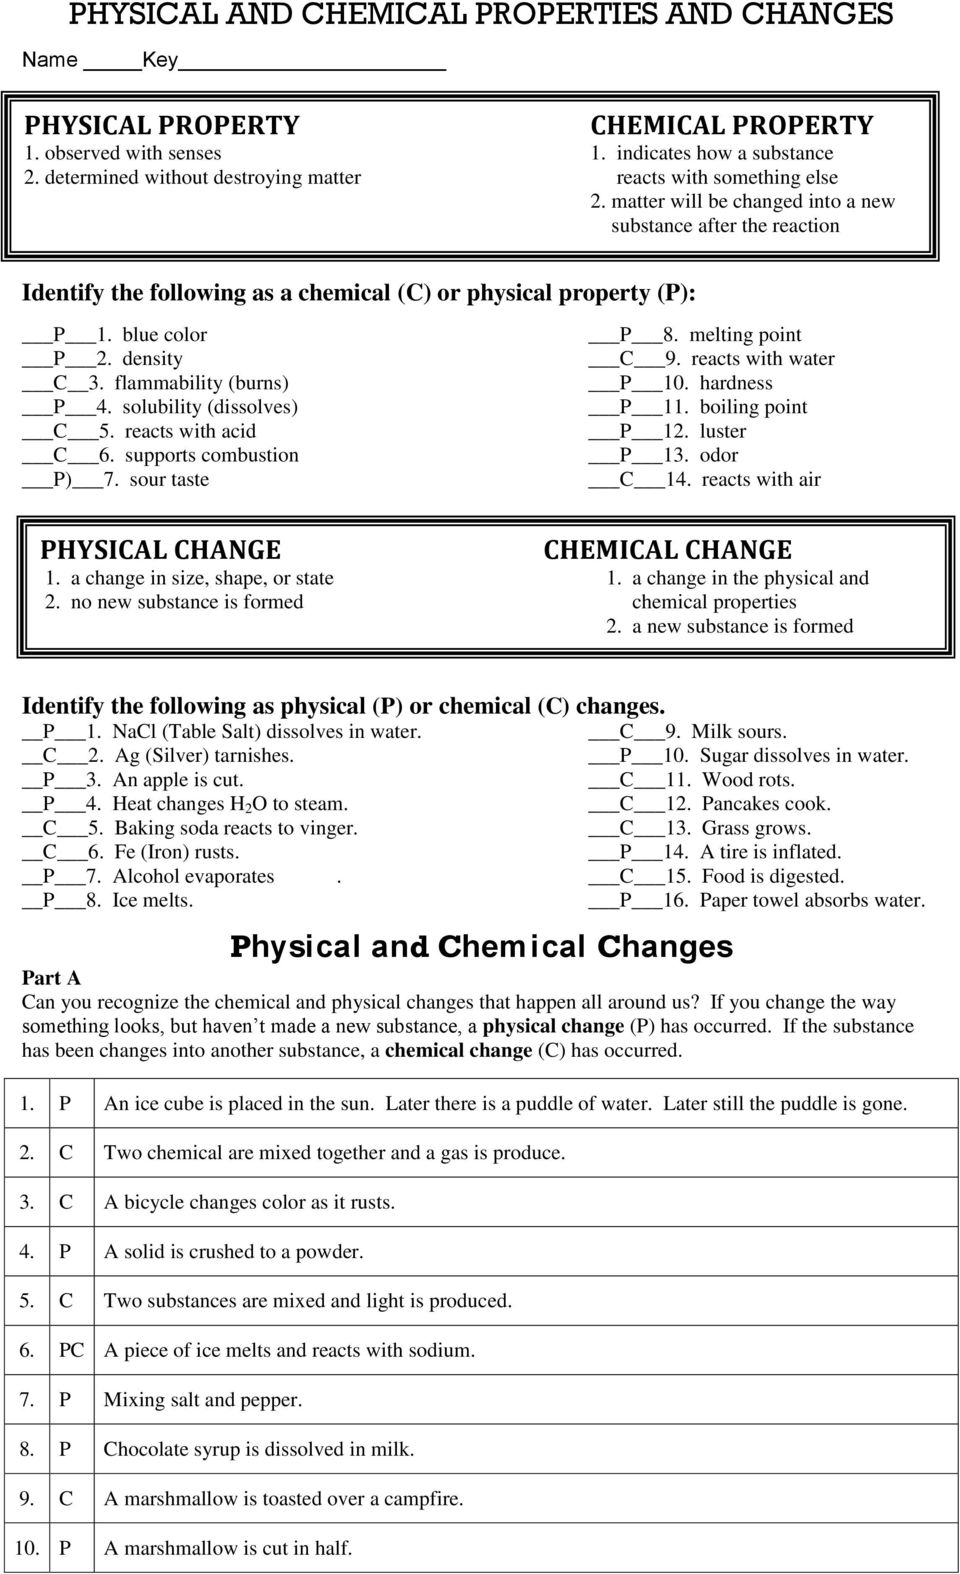 PHYSICAL AND CHEMICAL PROPERTIES AND CHANGES - PDF Free Download With Regard To Physical And Chemical Changes Worksheet